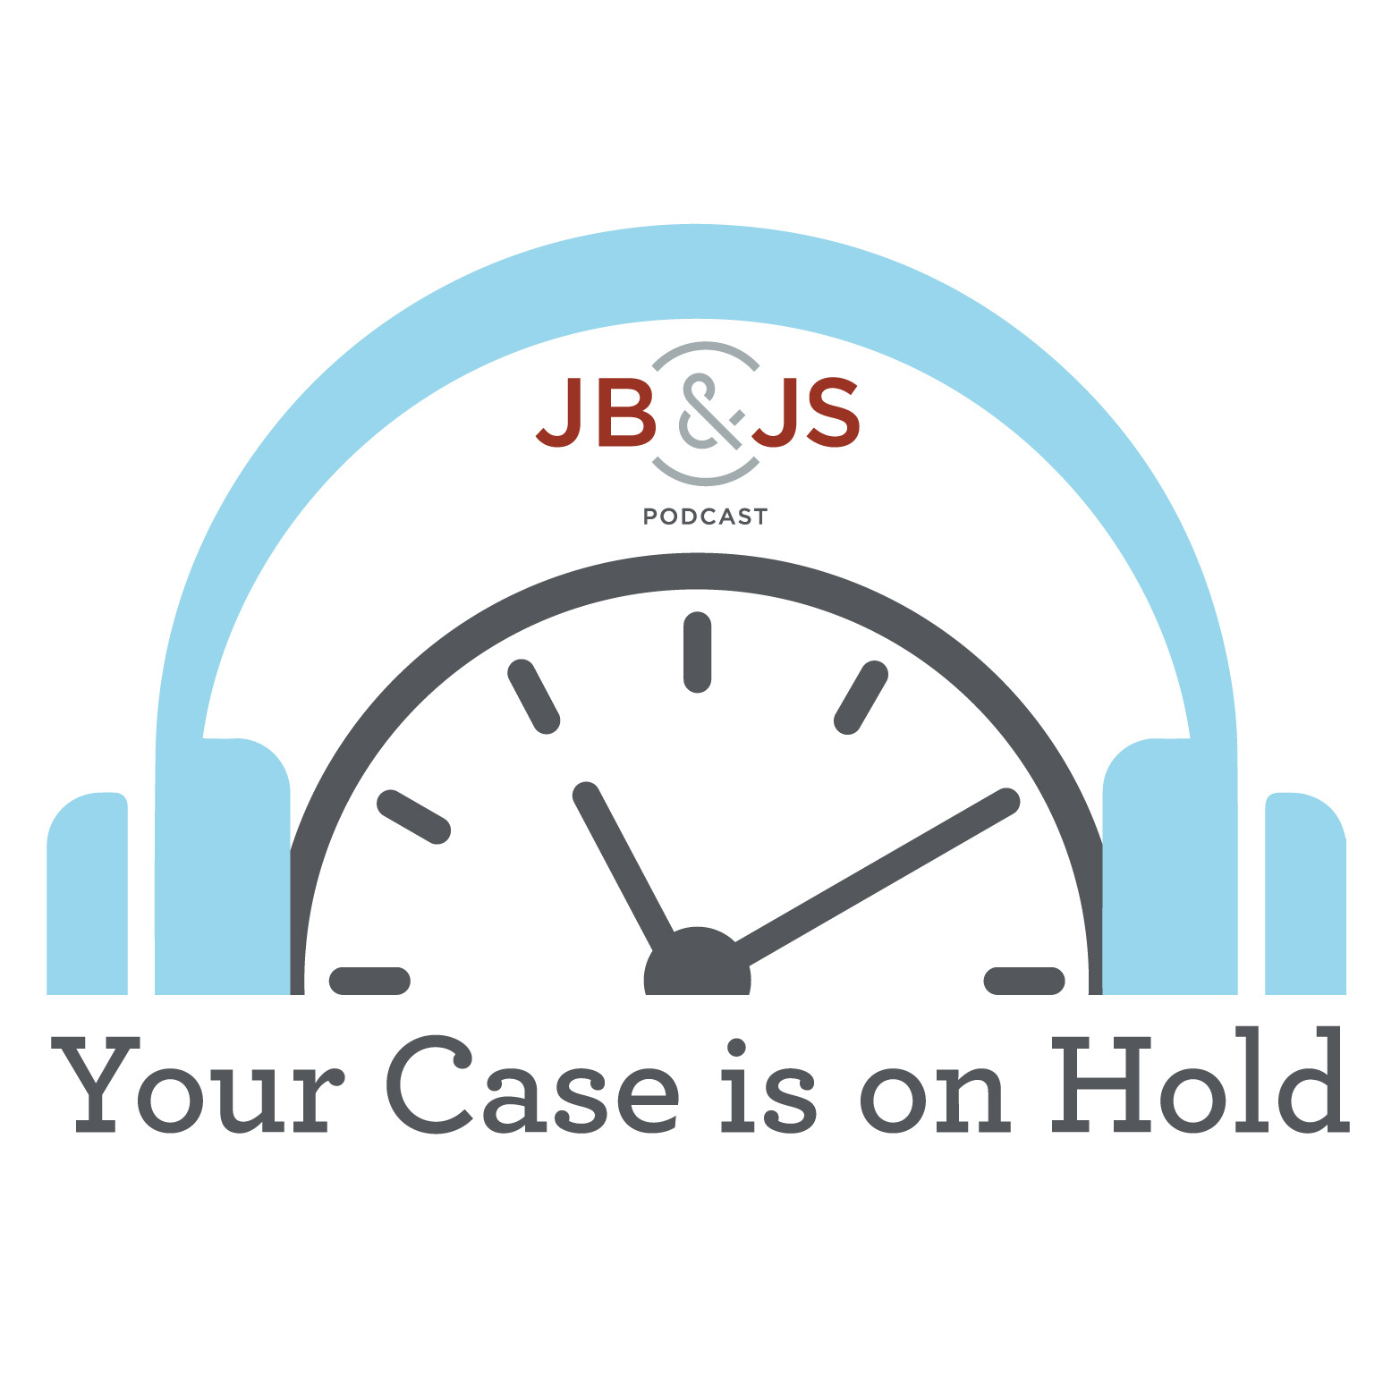 It’s a New Year and Your Case is Still on Hold!